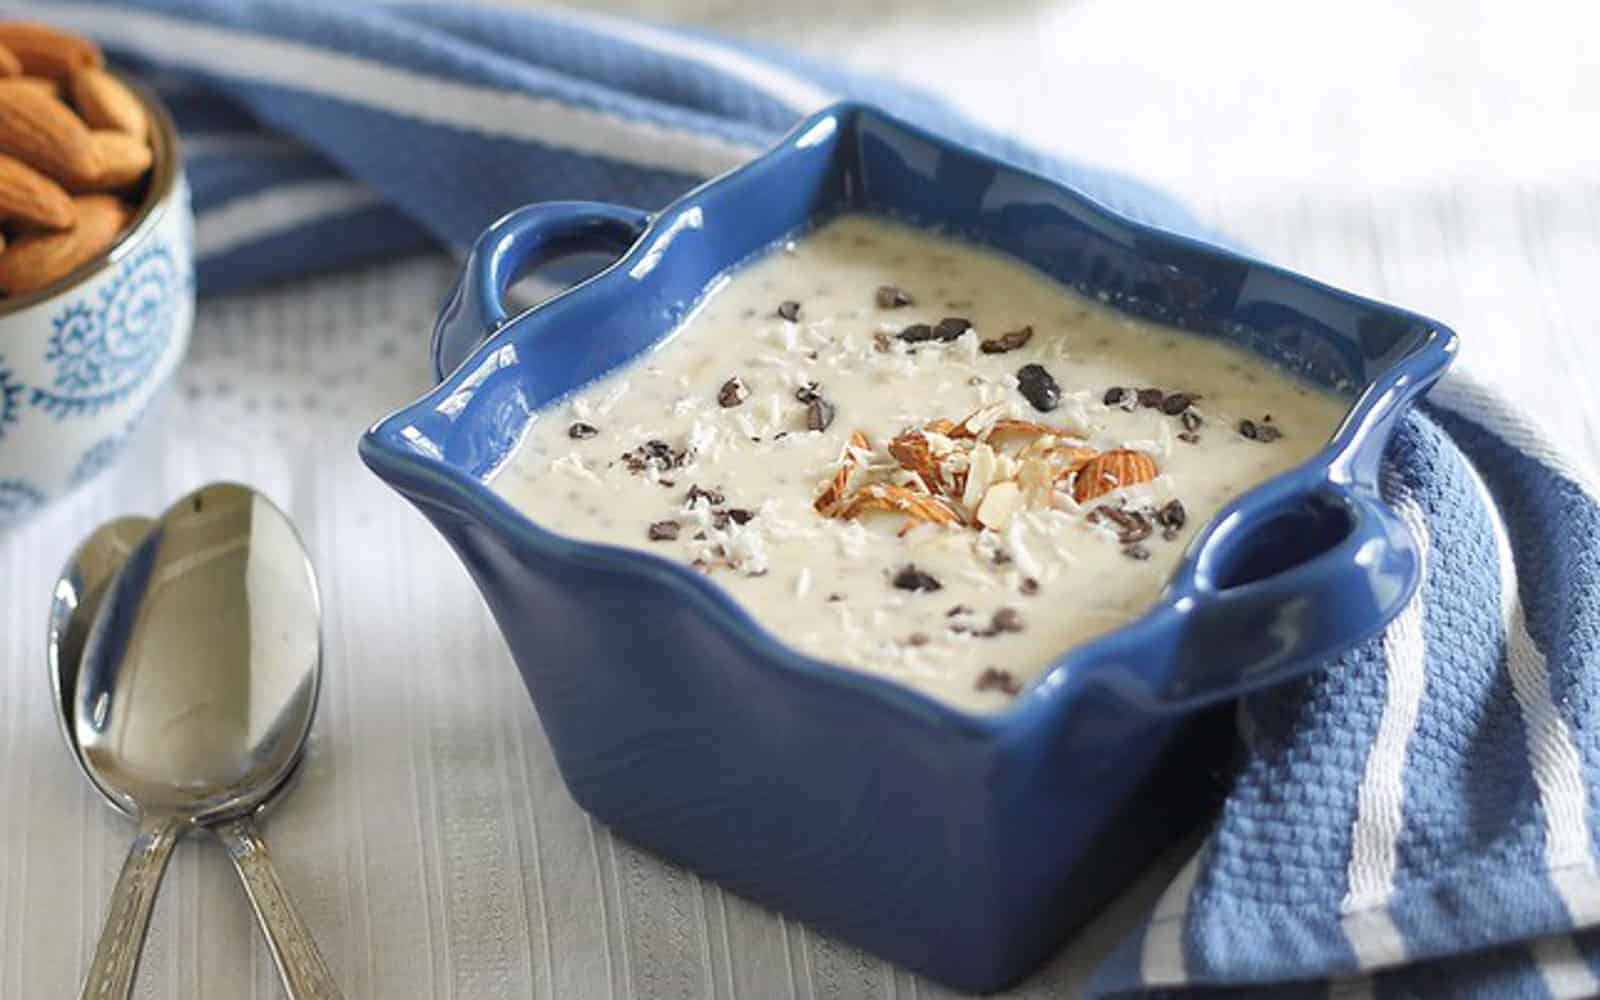 <p>These overnight almond joy oats offer a healthier breakfast alternative inspired by the candy bar. Packed with almond and coconut flavors, they provide a convenient and delicious morning meal. This oatmeal is a great choice for a flavorful start to the day.<br><strong>Get the Recipe: </strong><a href="https://www.runningtothekitchen.com/almond-joy-oats/?utm_source=msn&utm_medium=page&utm_campaign=msn">Almond Joy Oats</a></p>